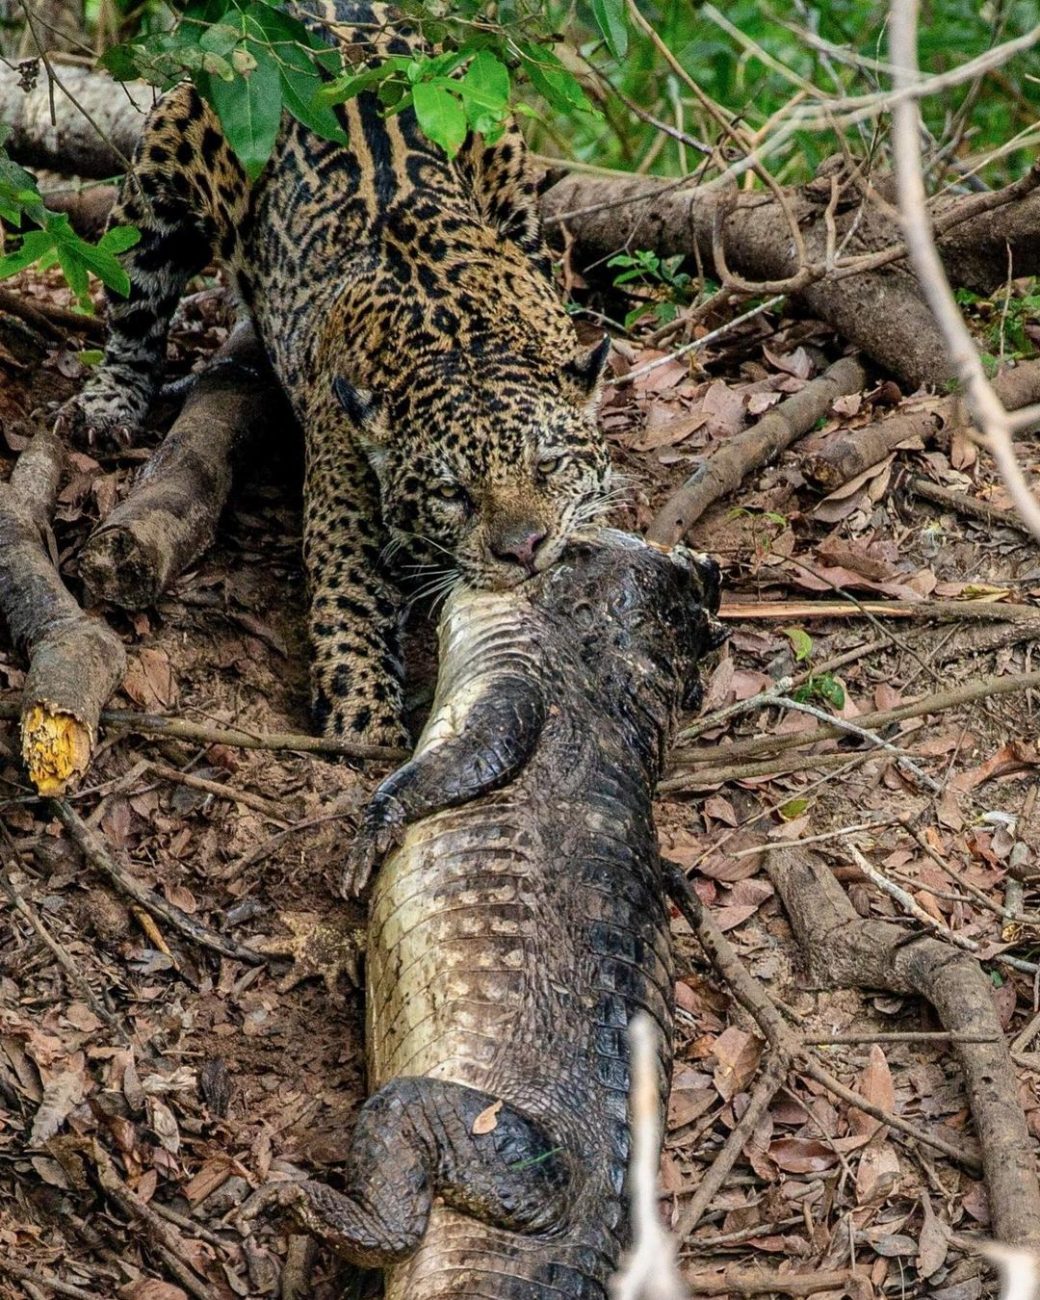 This species is especially associated with the Pantanal, one of the largest wet regions on the planet, located primarily in Brazil, where the jaguar is a symbol of the local fauna.  - Jaguar Ecological Reserve/breeding/ND